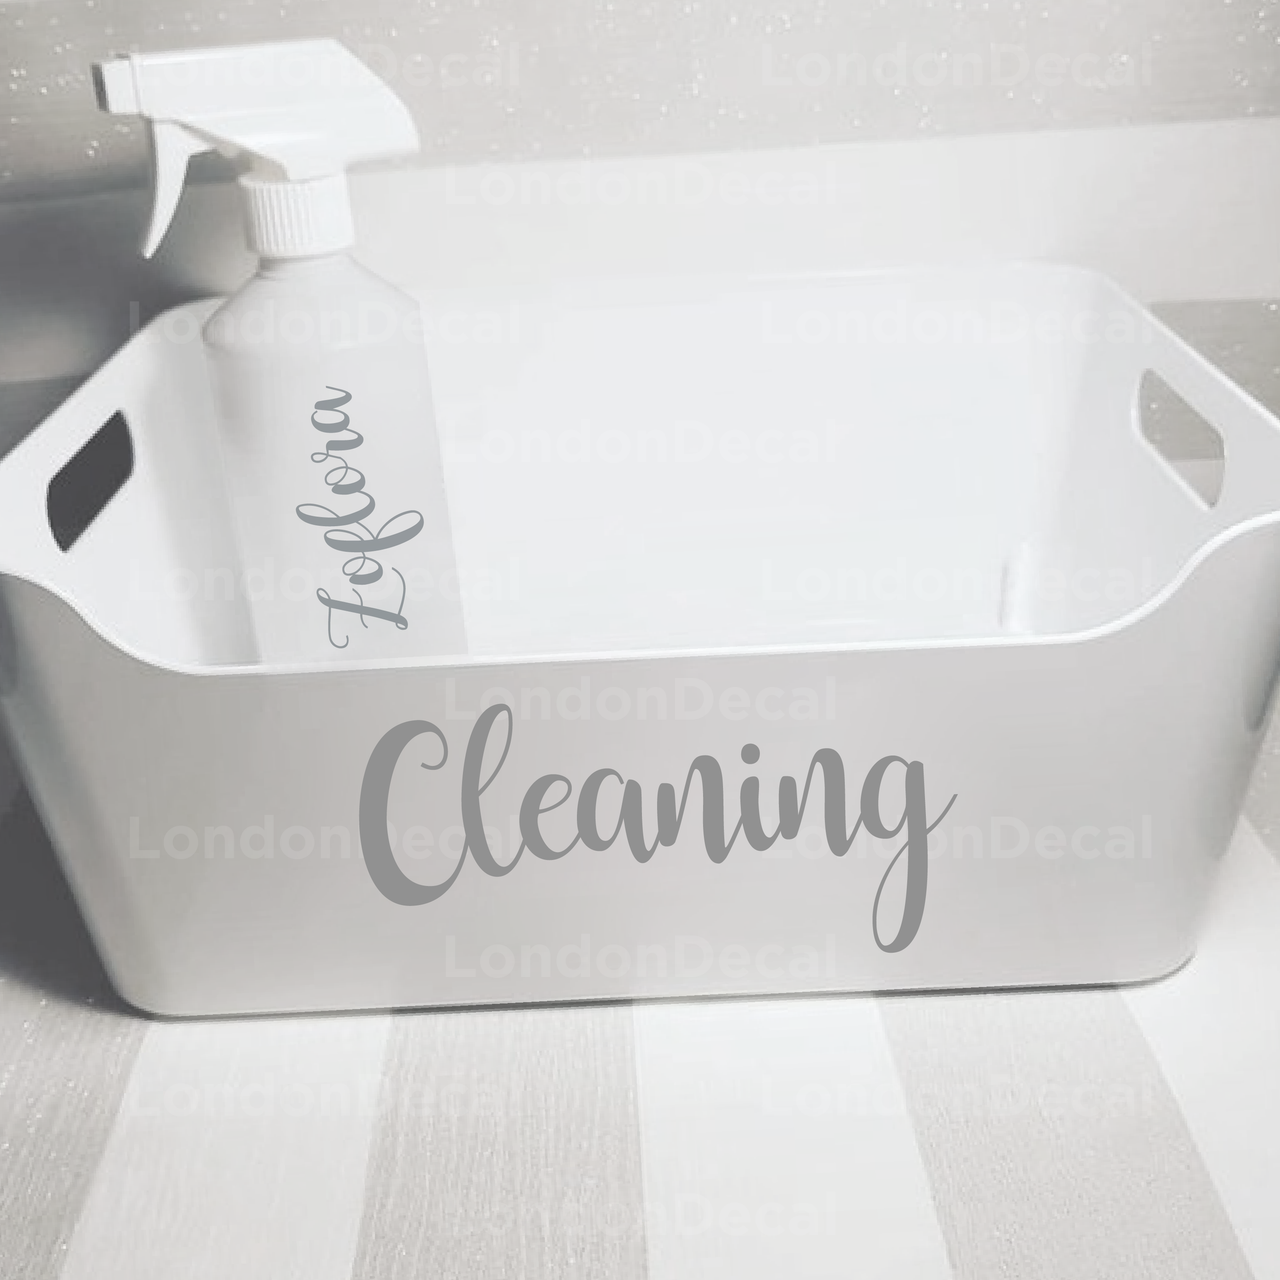 Cleaning - Mrs Hinch Inspired Decals (Type 3)